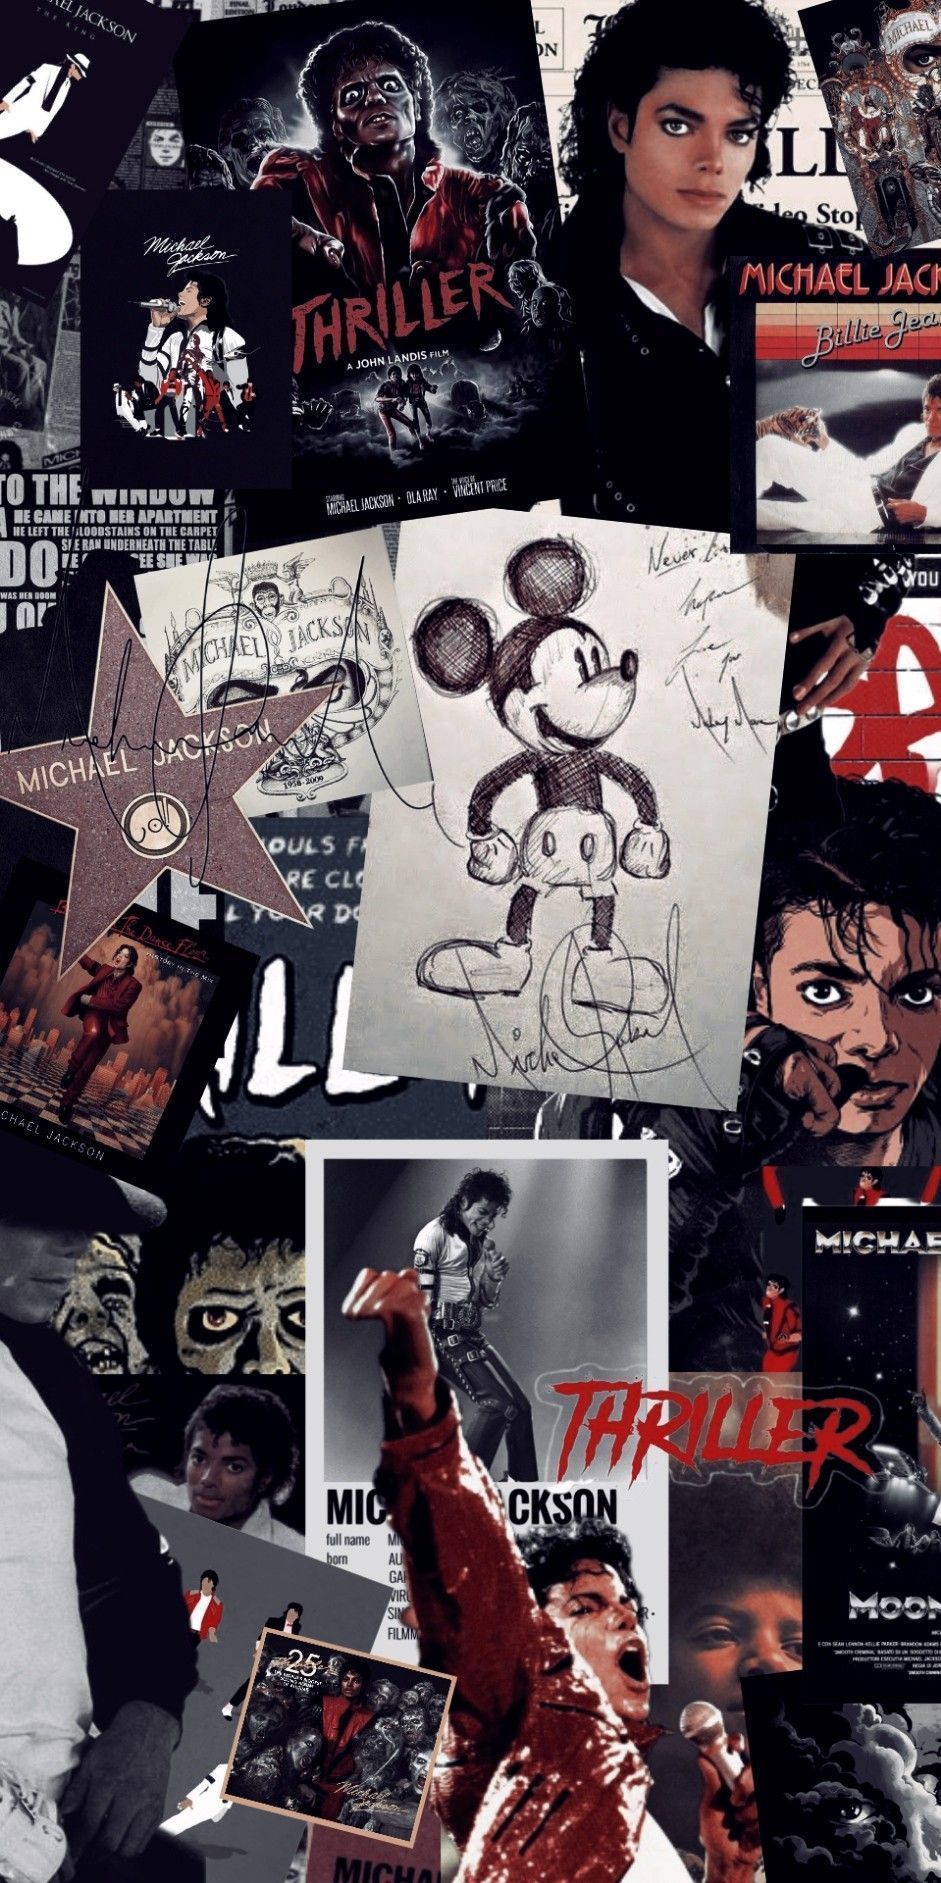 A collage of Michael Jackson's Thriller album cover, a drawing of Mickey Mouse, and the album cover for Thriller. - Michael Jackson